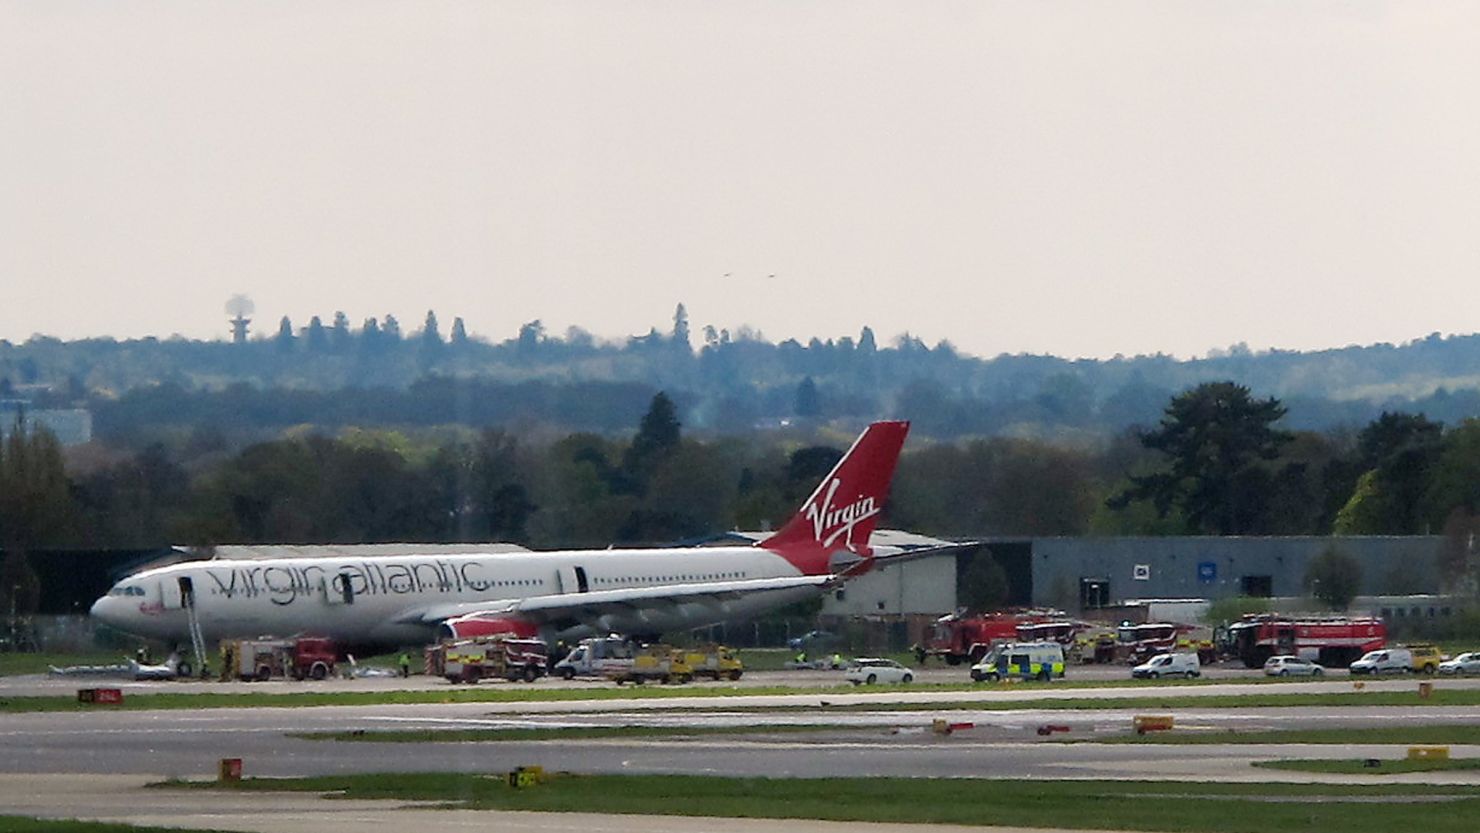 A Virgin Atlantic aircraft stands on the tarmac with emergency service vehicles in support after making an emergency landing at Gatwick Airport, London. 